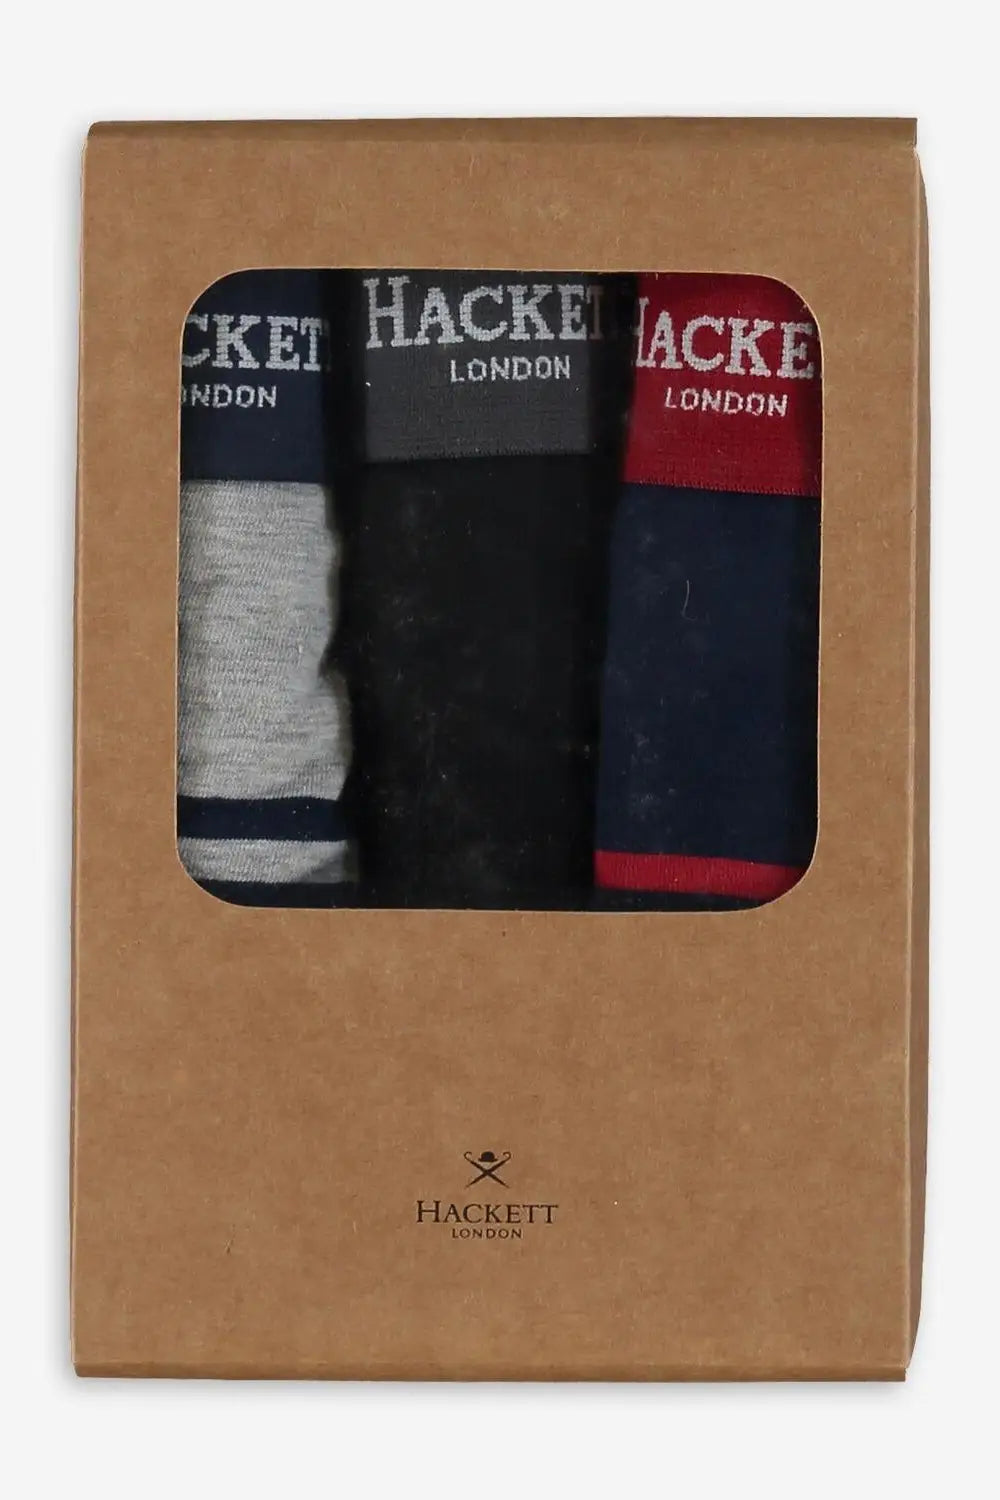 Hackett Jersey Boxers 3 Pack